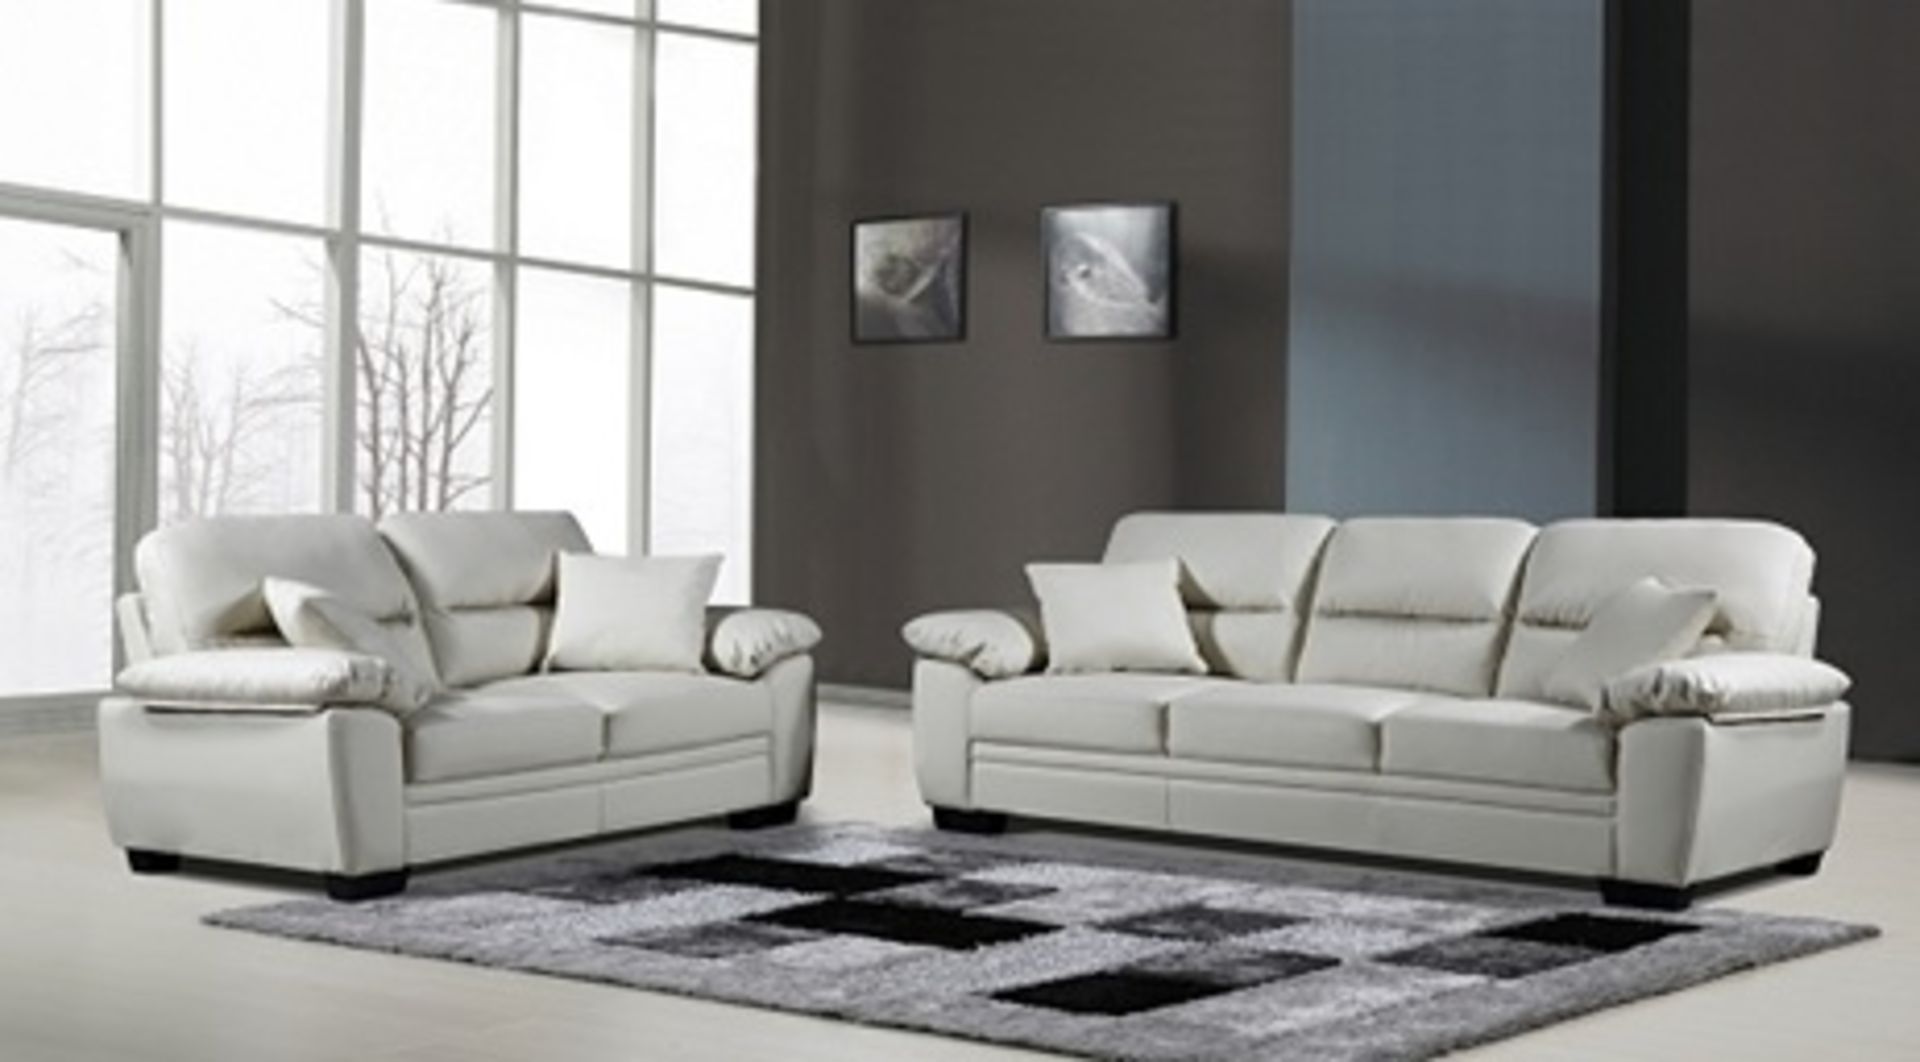 1 x Cream Faux Leather Sofa - 2 Seater (Brand New & Boxed - Ref SFS008)